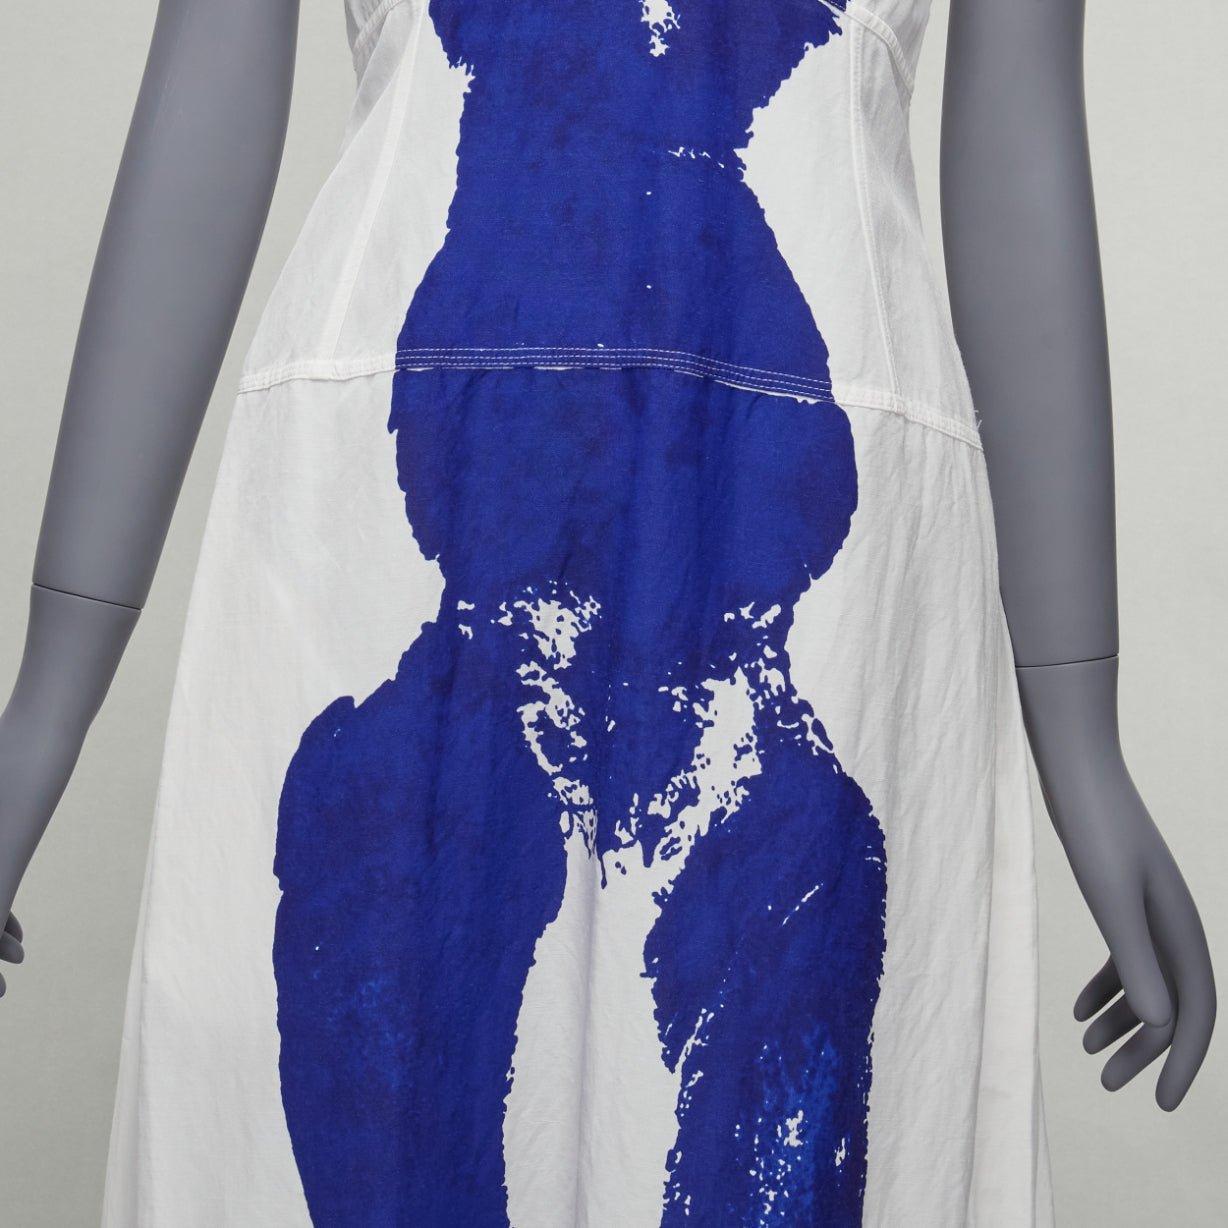 OLD CELINE Phoebe Philo 2017 Runway Yves Klein blue body print white dress FR34 XS
Reference: LNKO/A02120
Brand: Celine
Designer: Phoebe Philo
Collection: 2017 Yves Klein - Runway
Material: Ramie, Viscose
Color: Blue, White
Pattern: